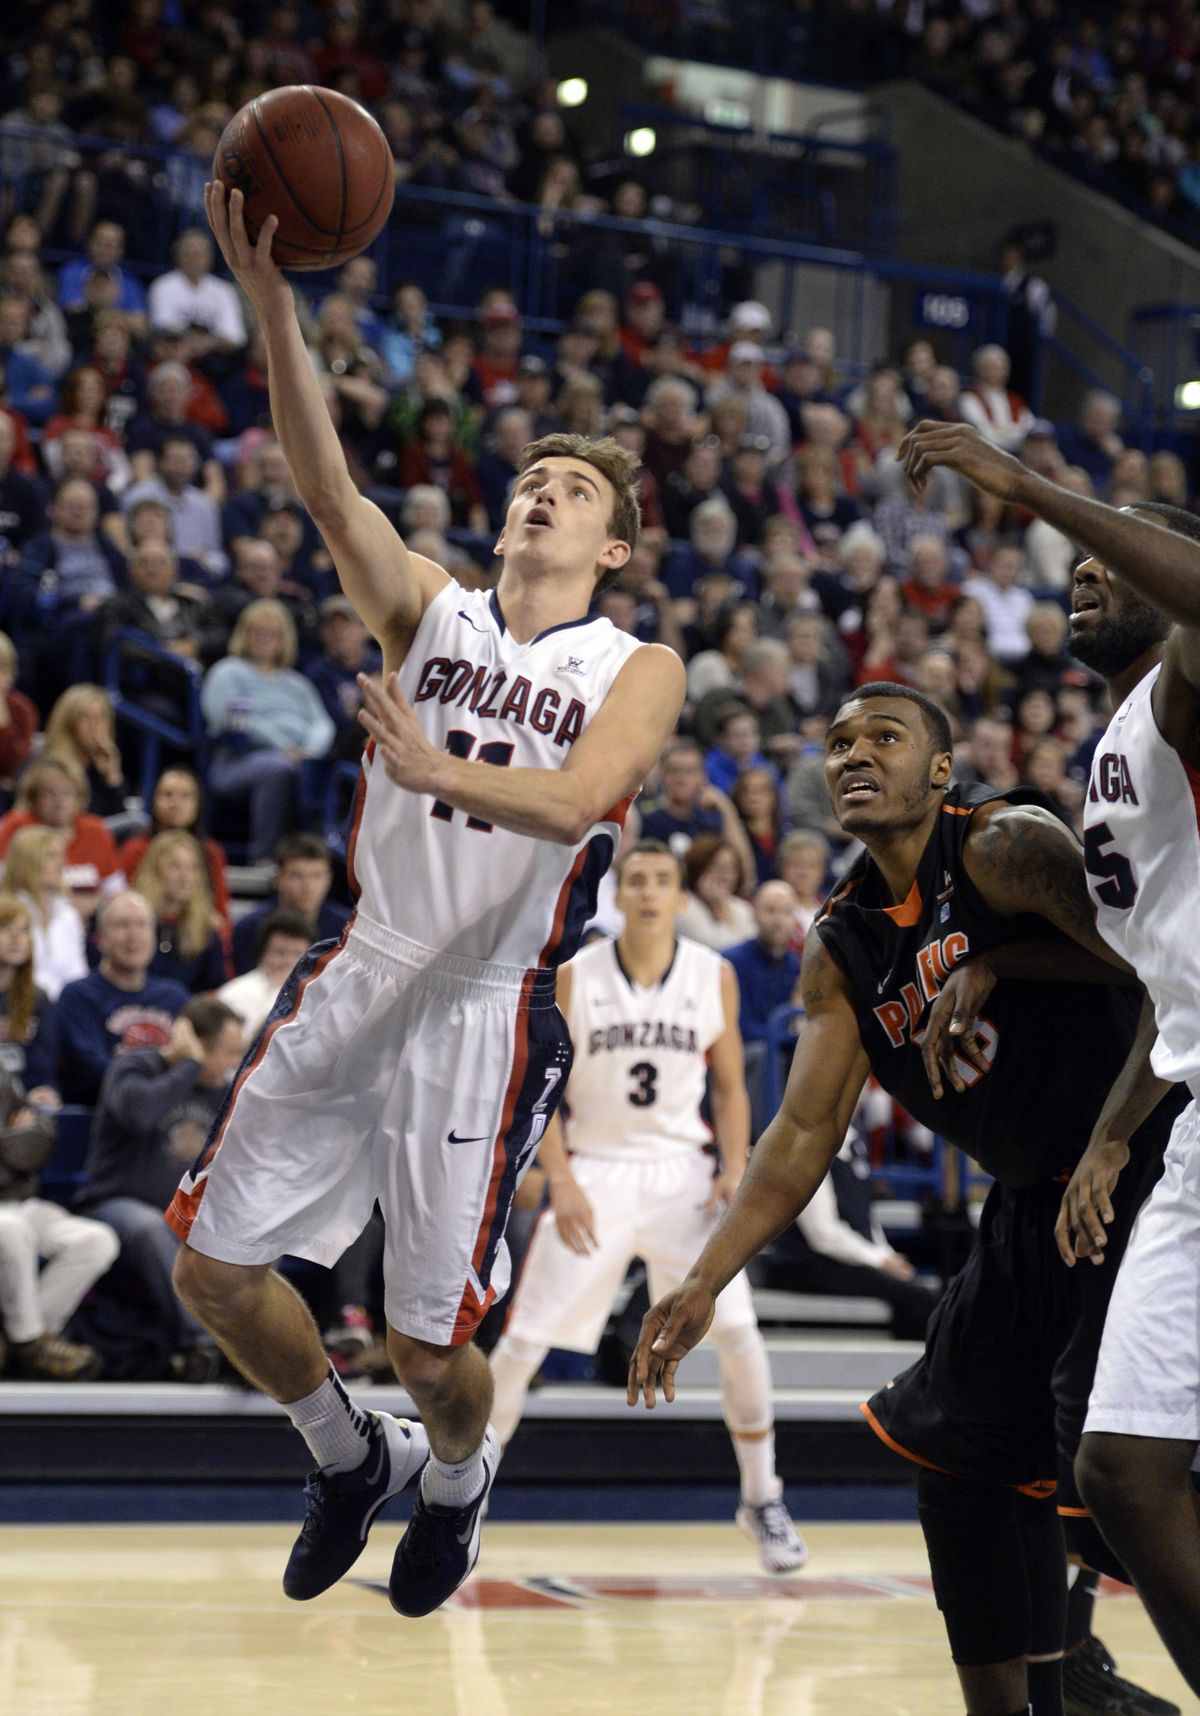 Gonzaga guard David Stockton scores two of his 15 points. He didn’t miss a shot all game. (Colin Mulvany)